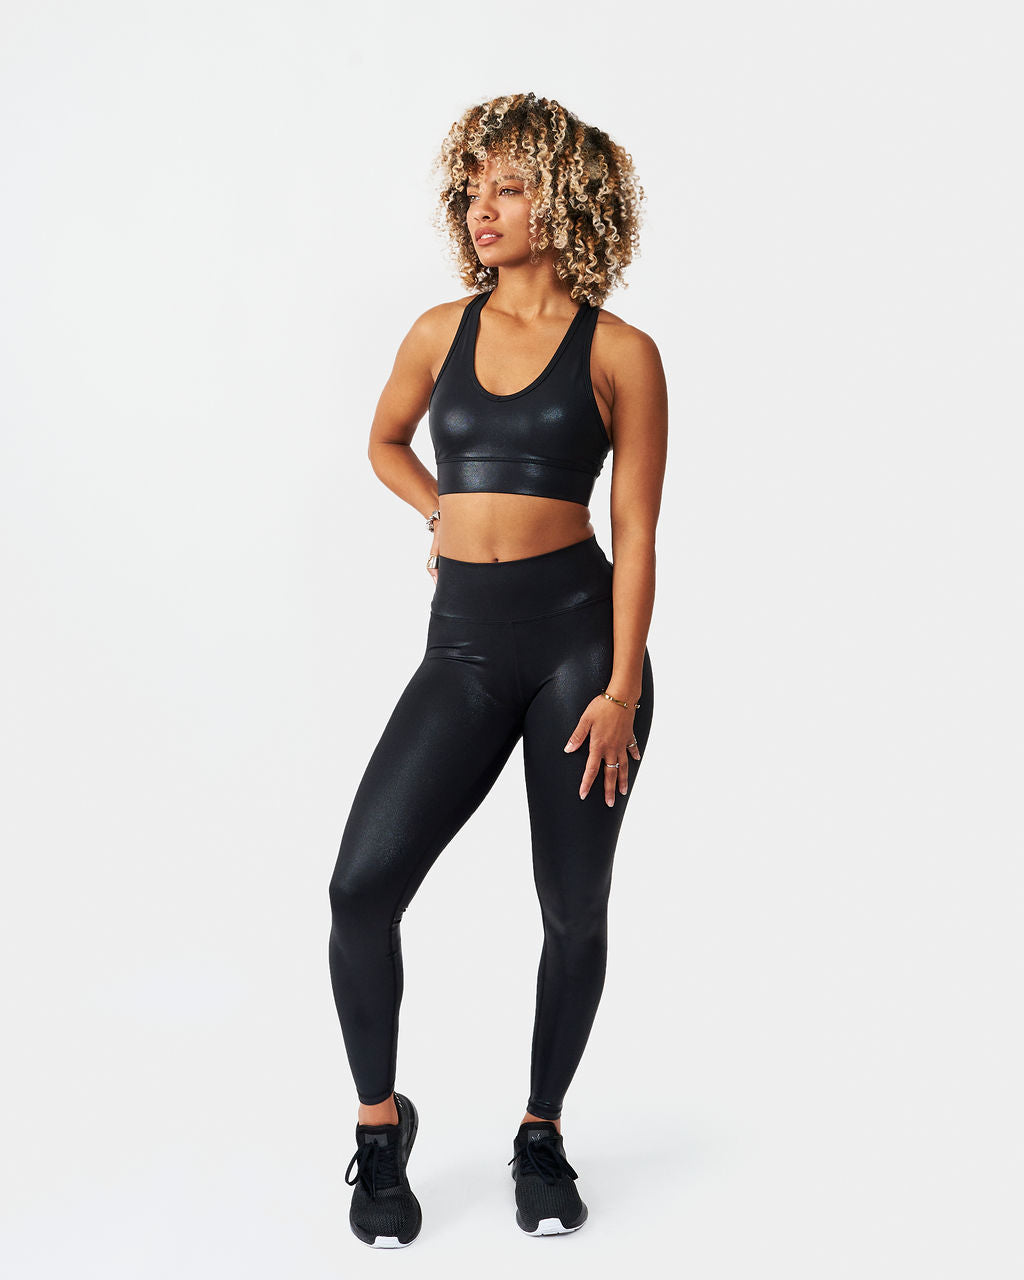 The Radiance Legging in Onyx